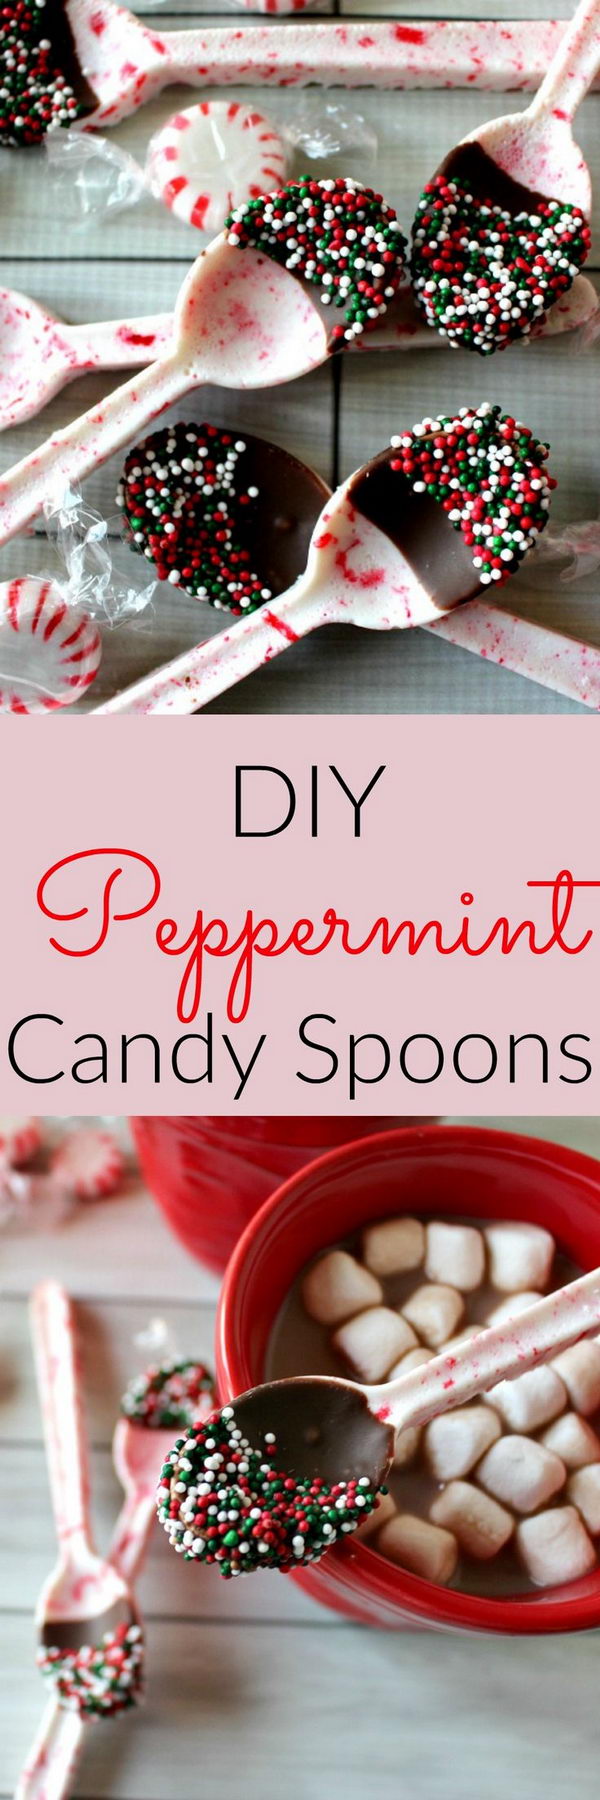 Homemade Peppermint Candy Spoons. 